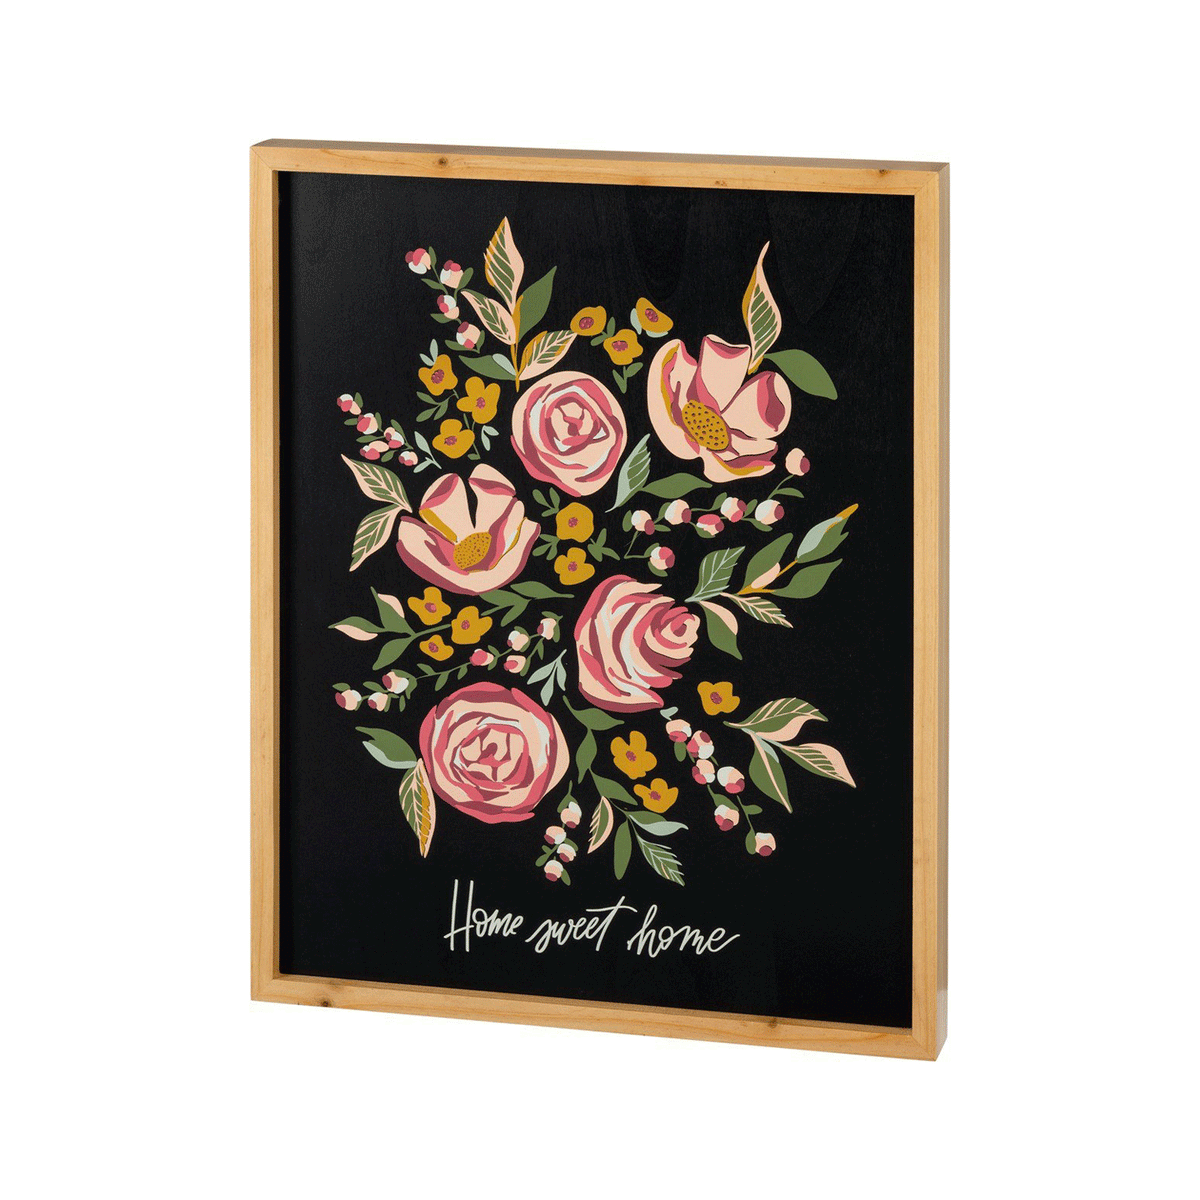 Home Sweet Home Floral Wall Decor - Picture Frames & Wall